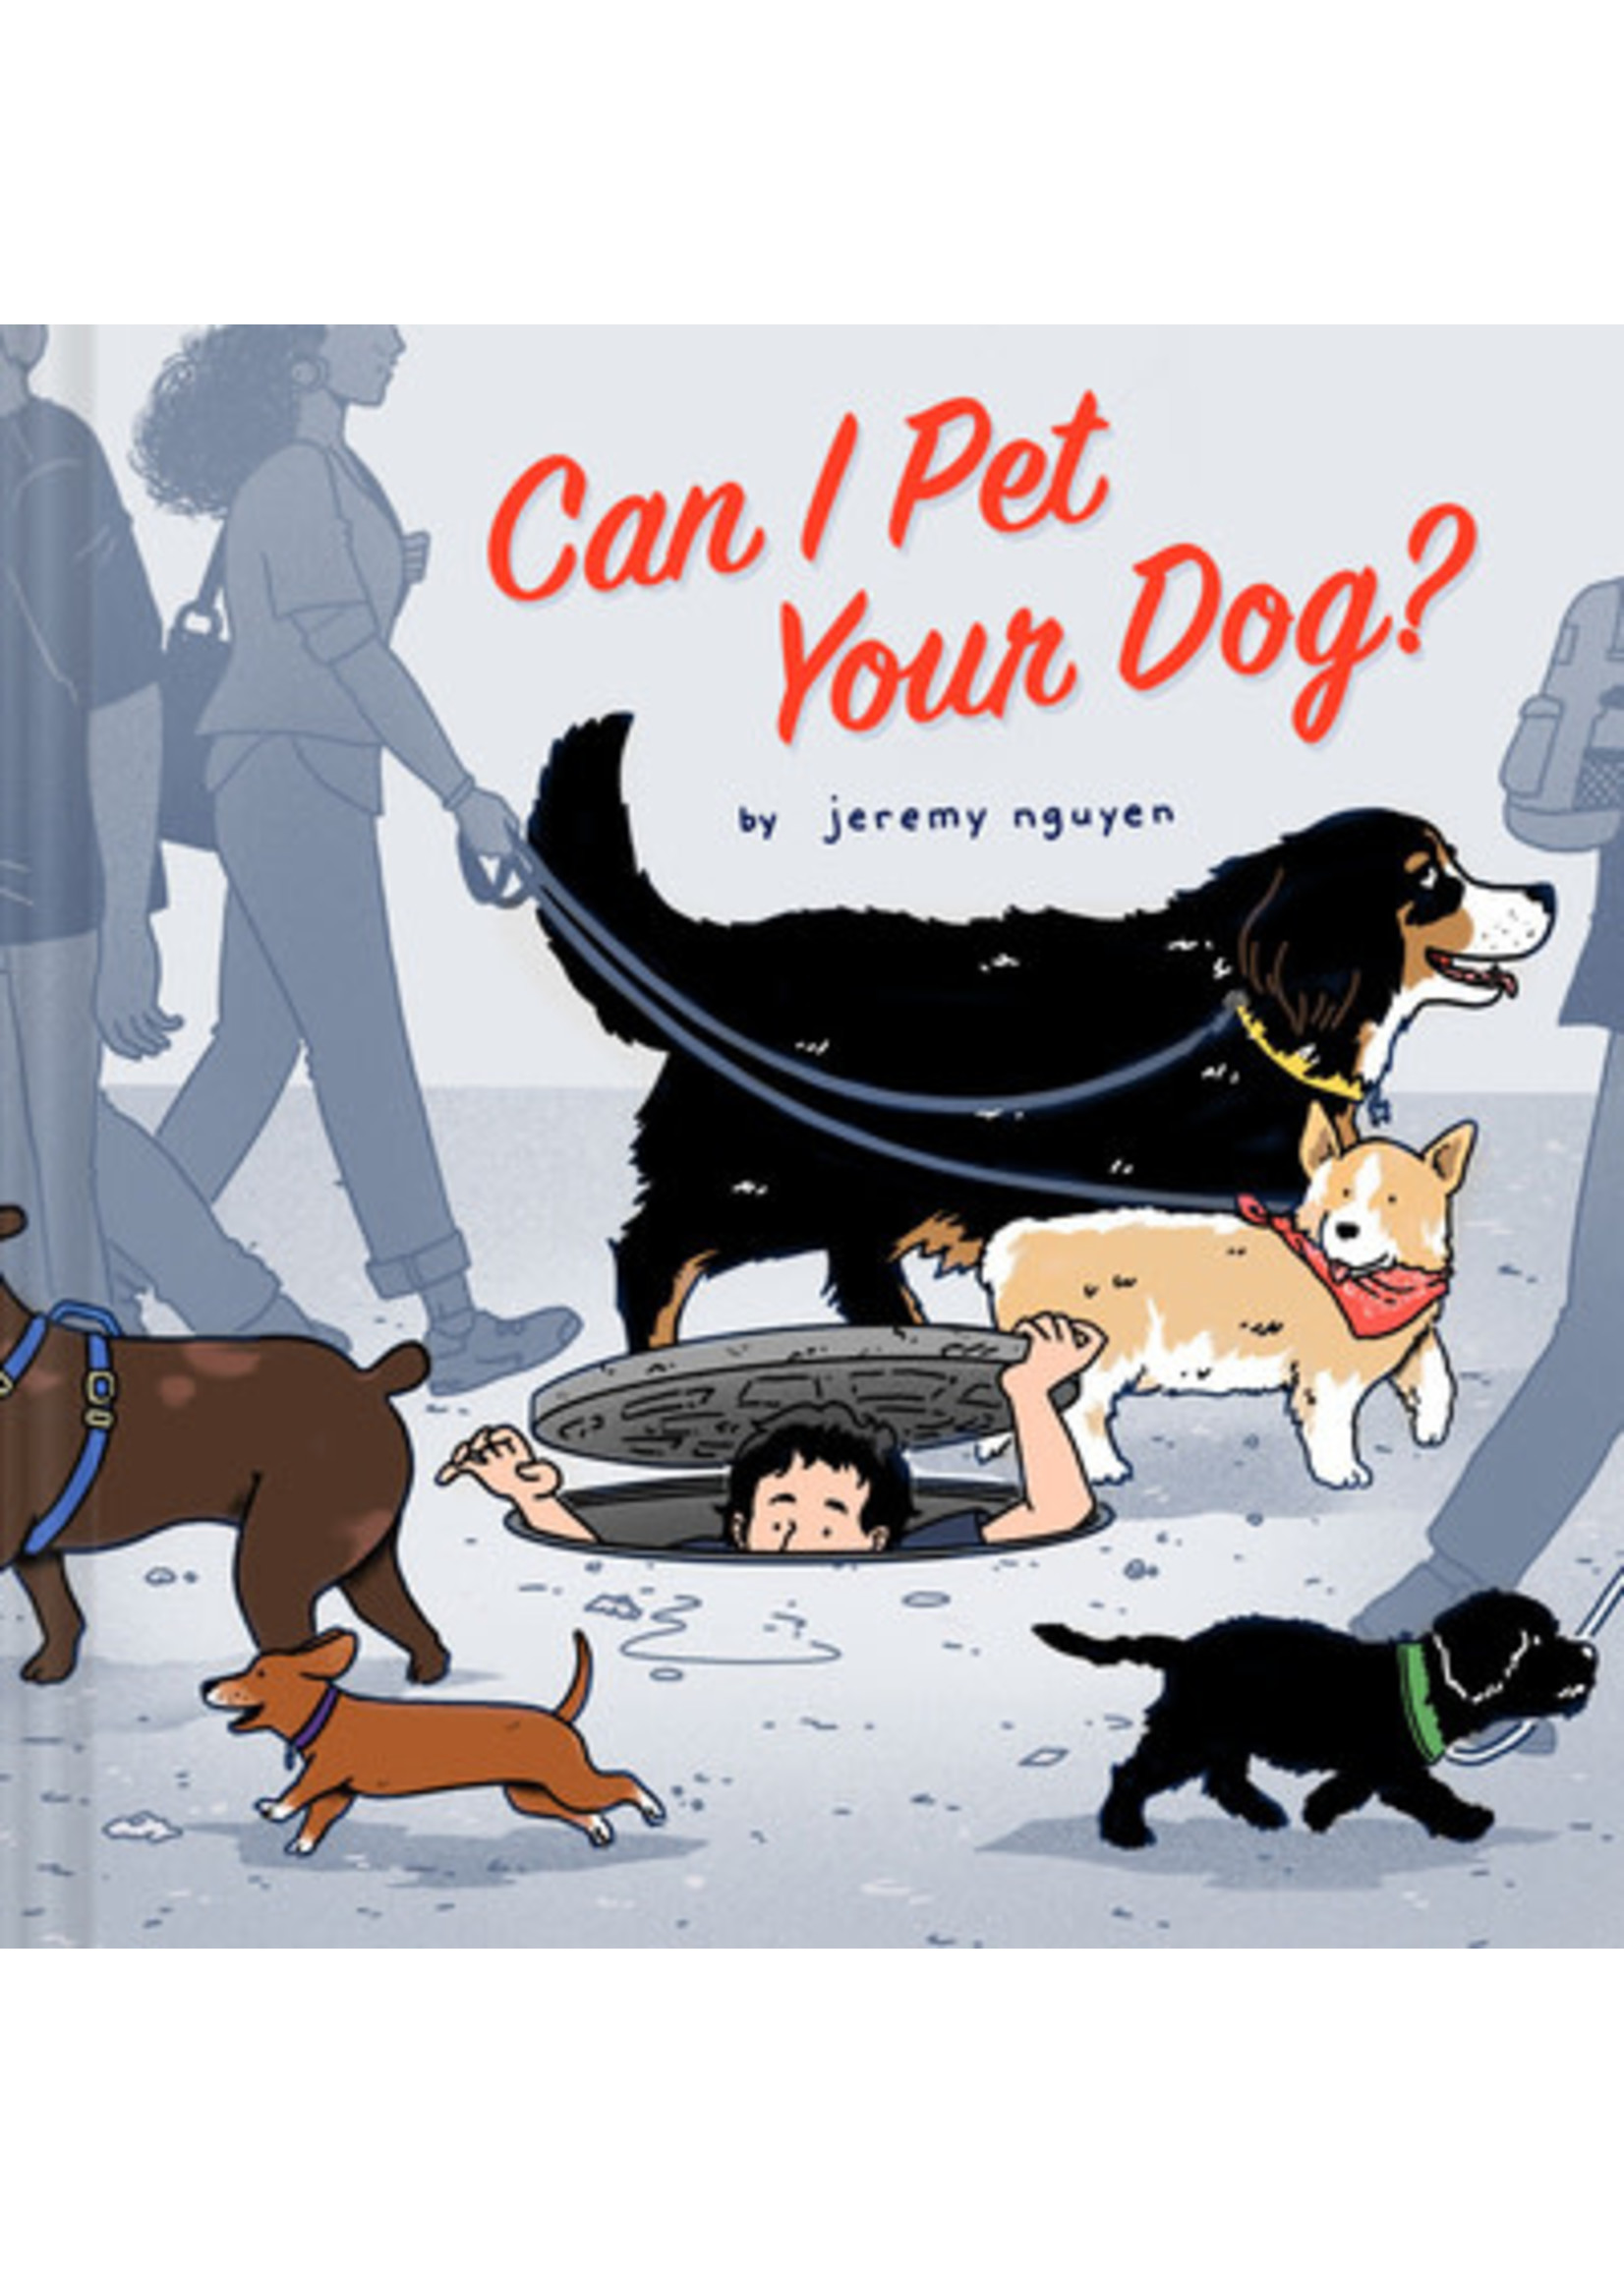 Can I Pet Your Dog? by Jeremy Nguyen